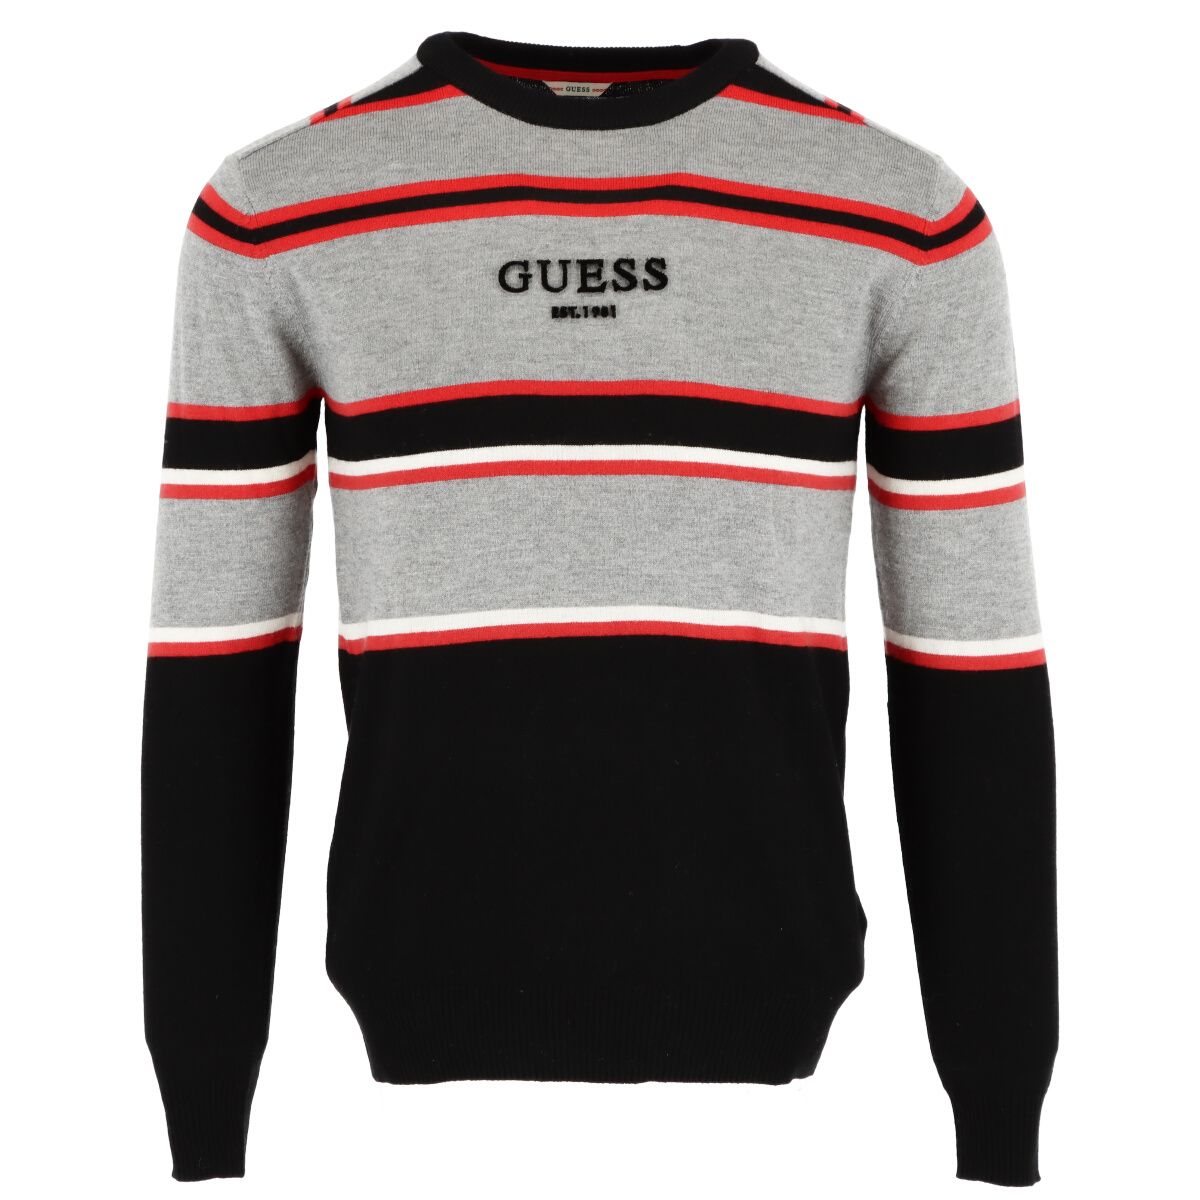 Brand: Guess Gender: Men Type: Knitwear Season: Fall/Winter  PRODUCT DETAIL • Color: black • Pattern: striped • Sleeves: long • Neckline: round neck •  Article code: M0BR54Z2PL0  COMPOSITION AND MATERIAL • Composition: -30% wool -35% polyamide -35% viscose  •  Washing: handwash